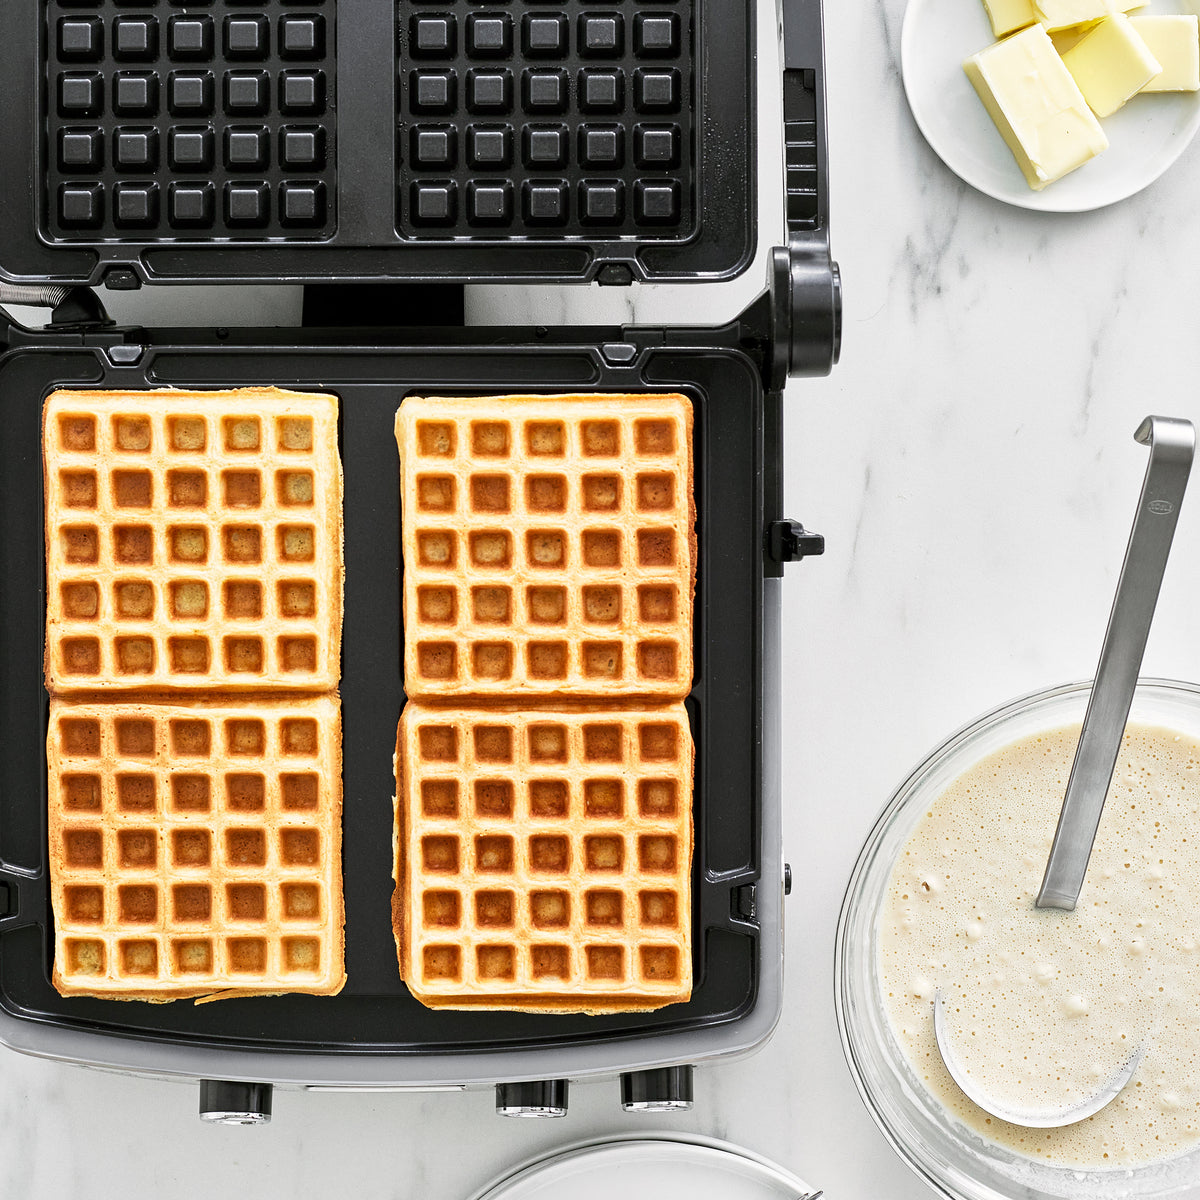 How to Clean a Waffle Maker, Plus More Waffle FAQs